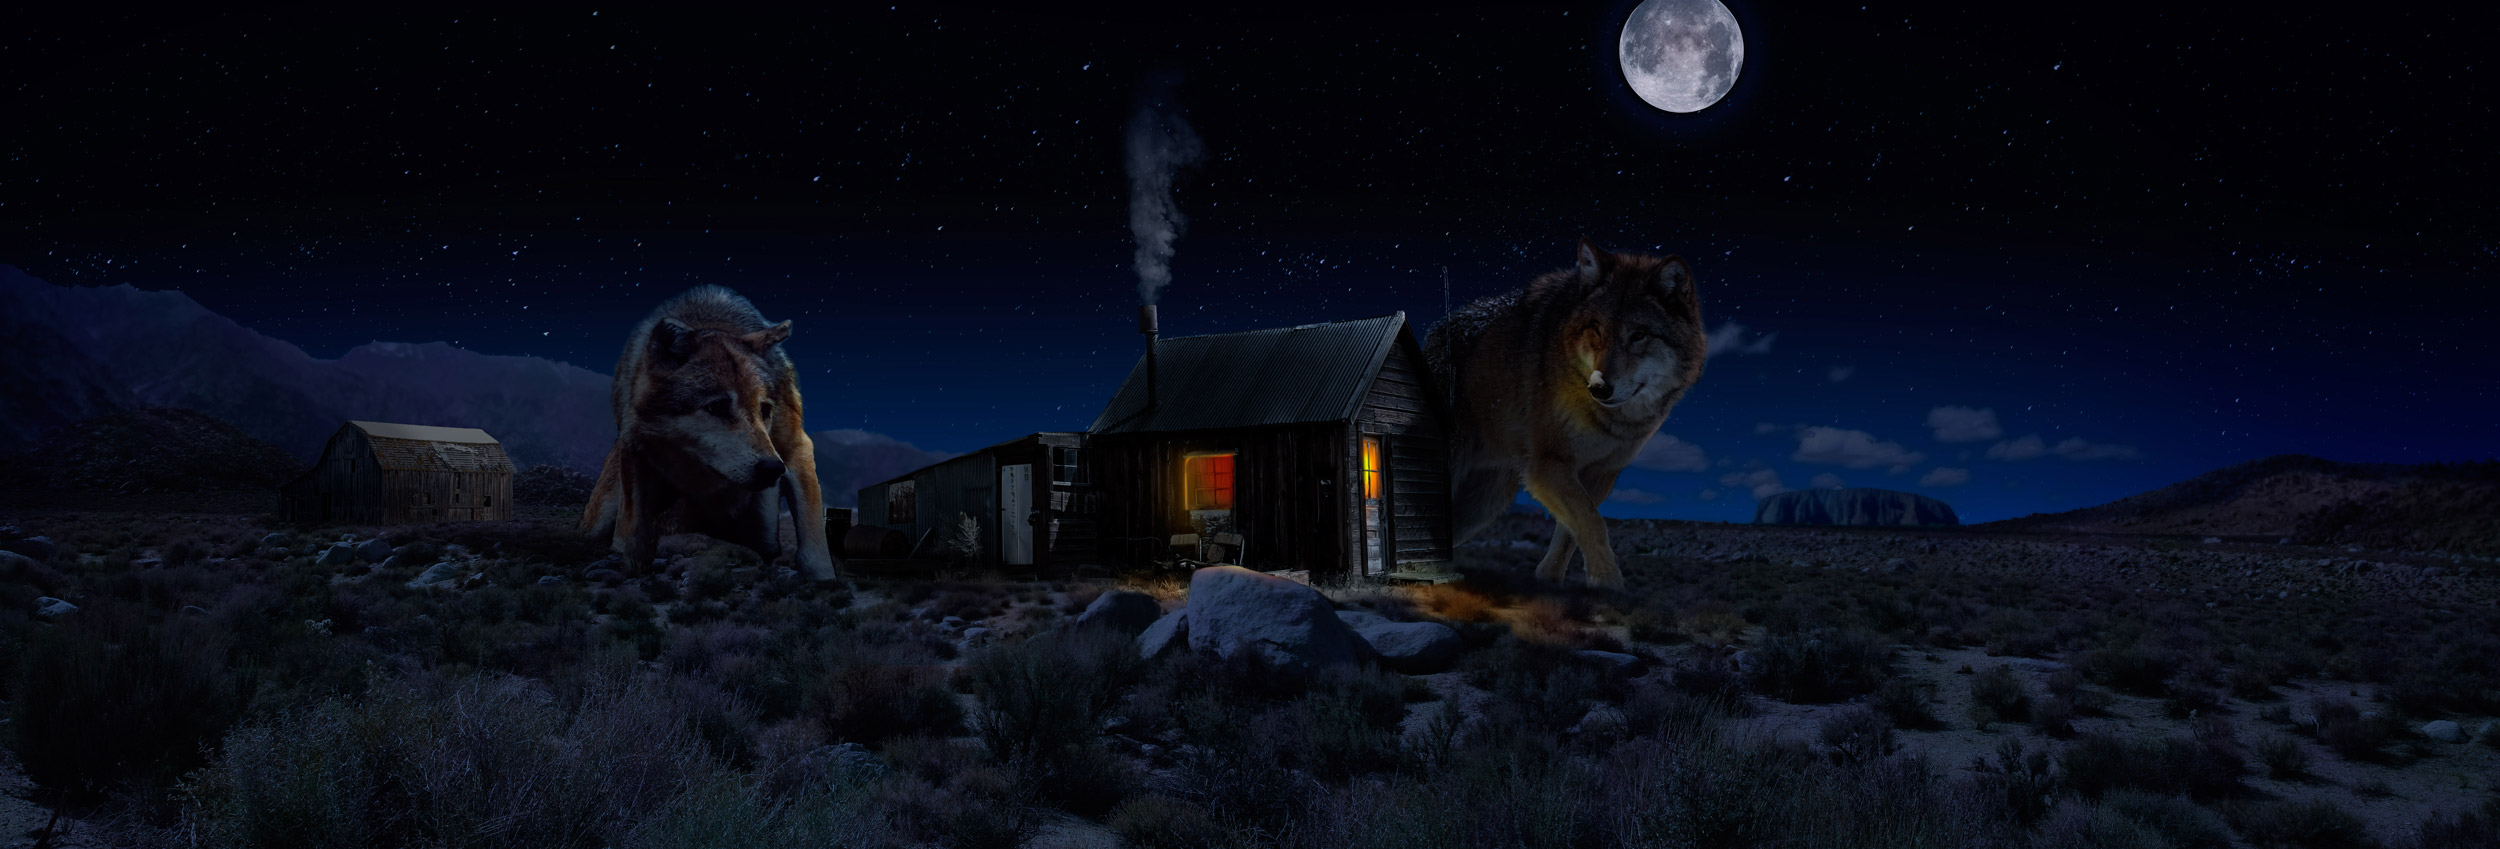 Matte painting - desert with wolves